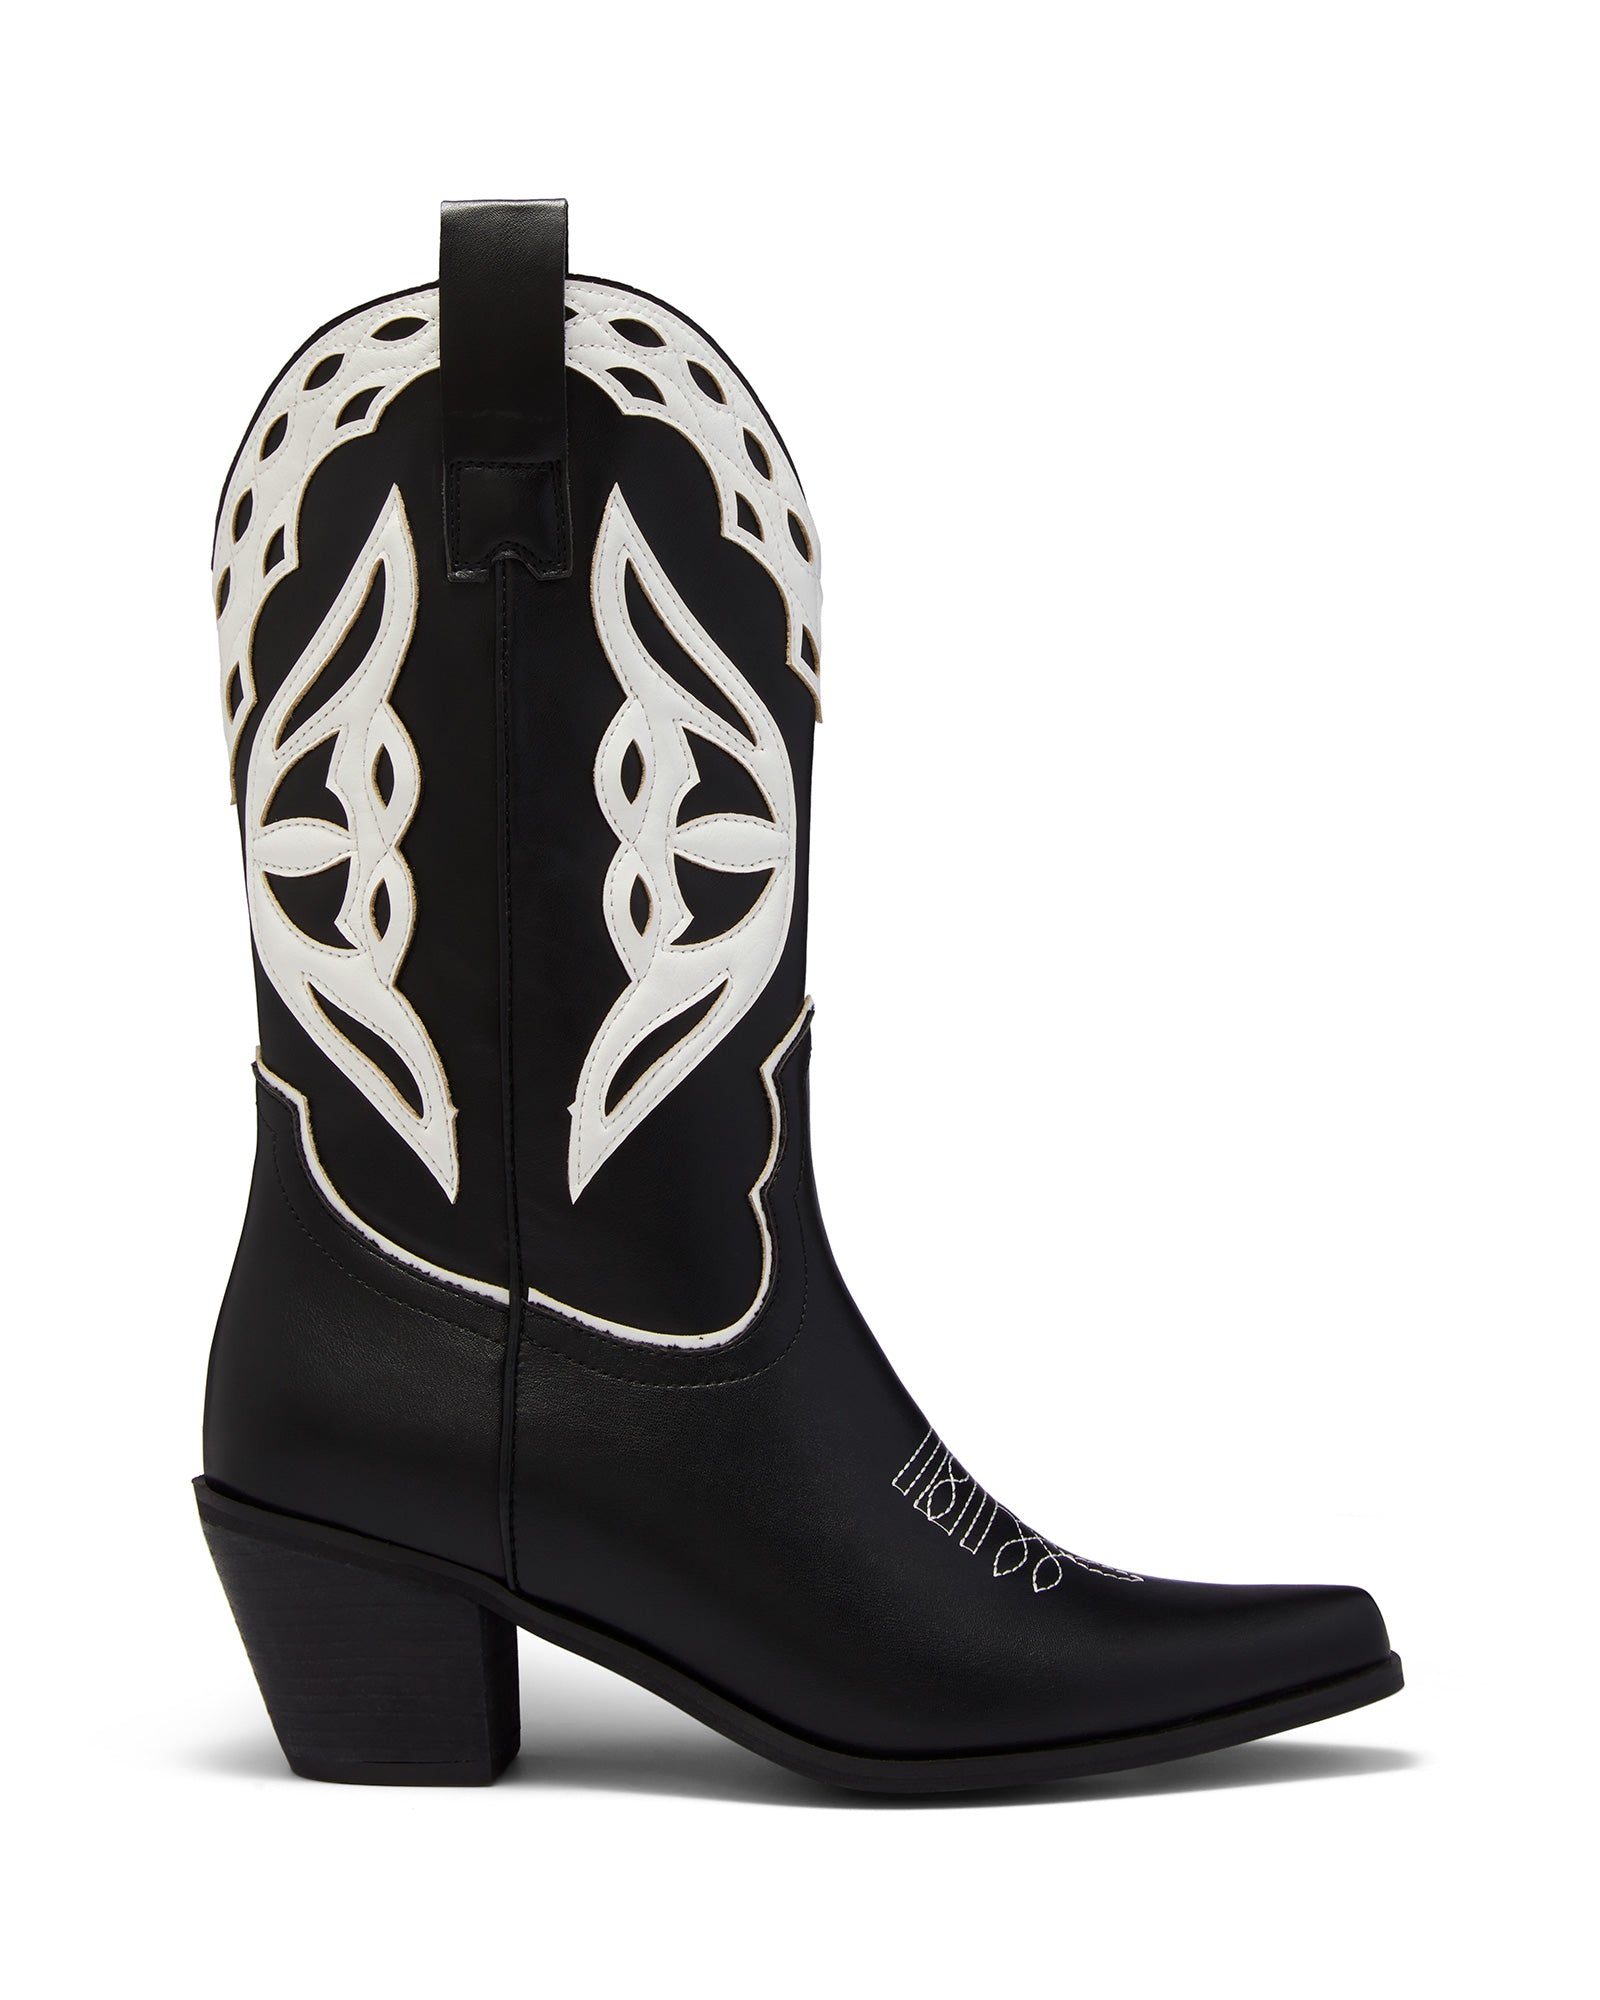 Therapy Shoes Chicago Black/White | Women's Boots | Western | Cowboy | Cowgirl